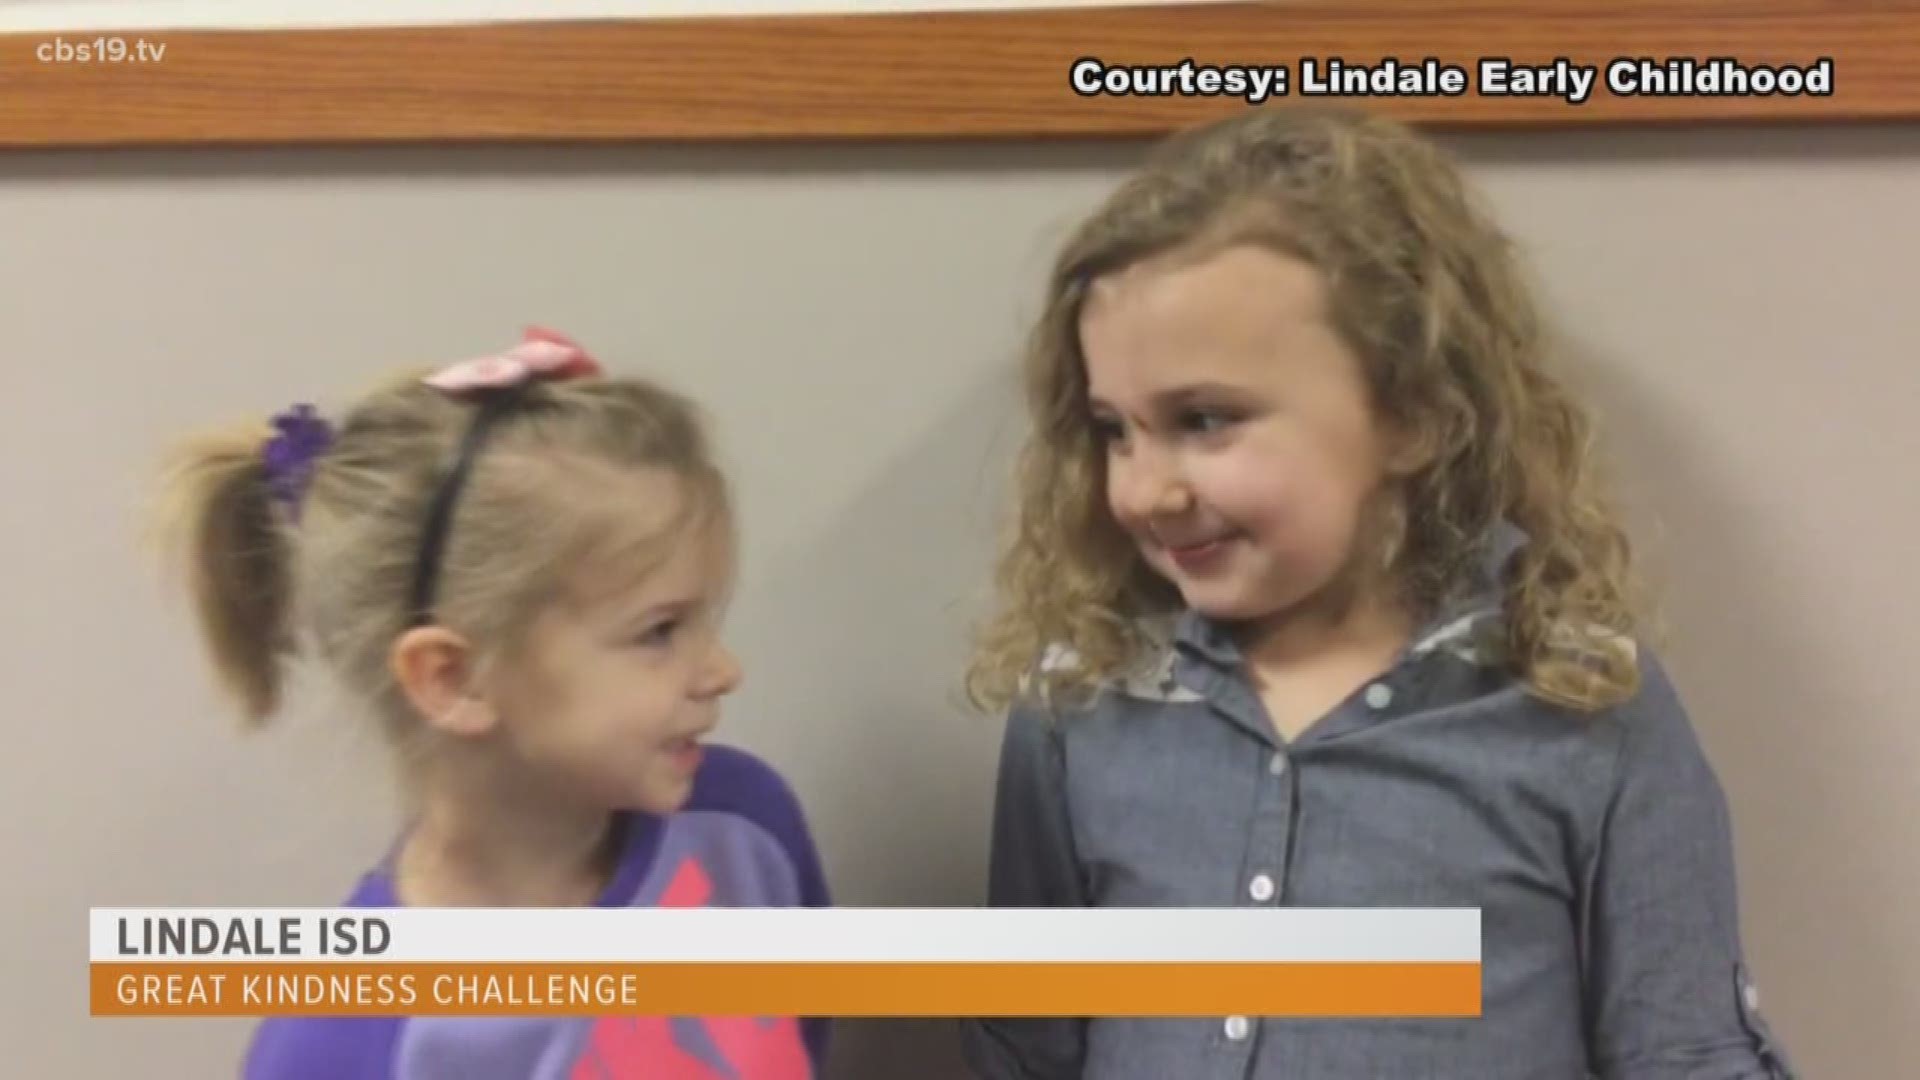 Lindale ISD takes the #39 Great Kindness Challenge #39 cbs19 tv